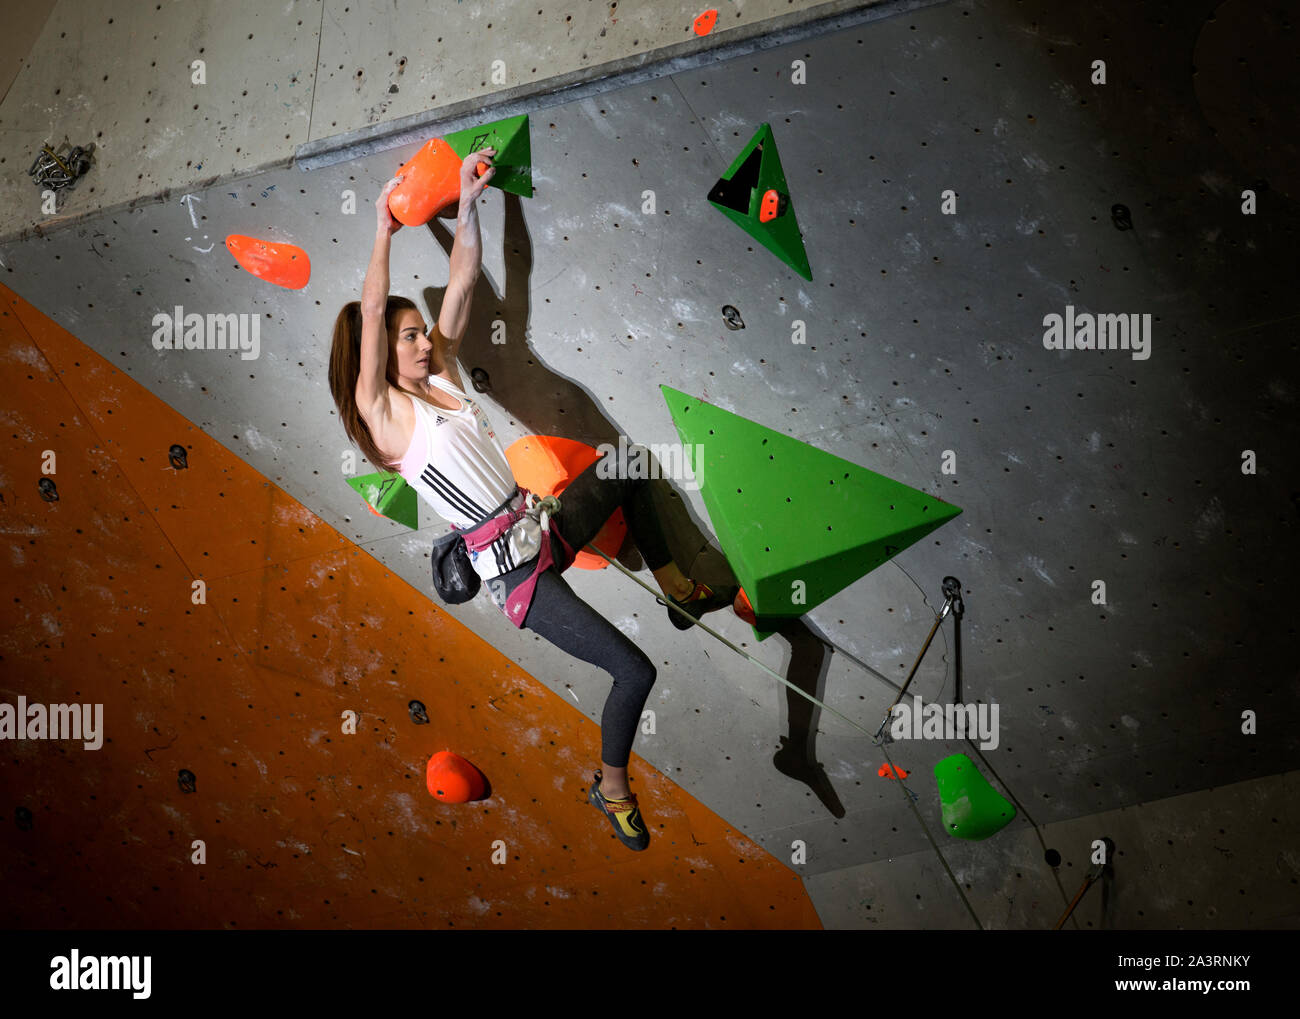 Lucka Rakovec of Slovenia competes in the Lead climbing womans Final on at the IFSC Climbing World Championships at the Edinburgh International Climbi Stock Photo